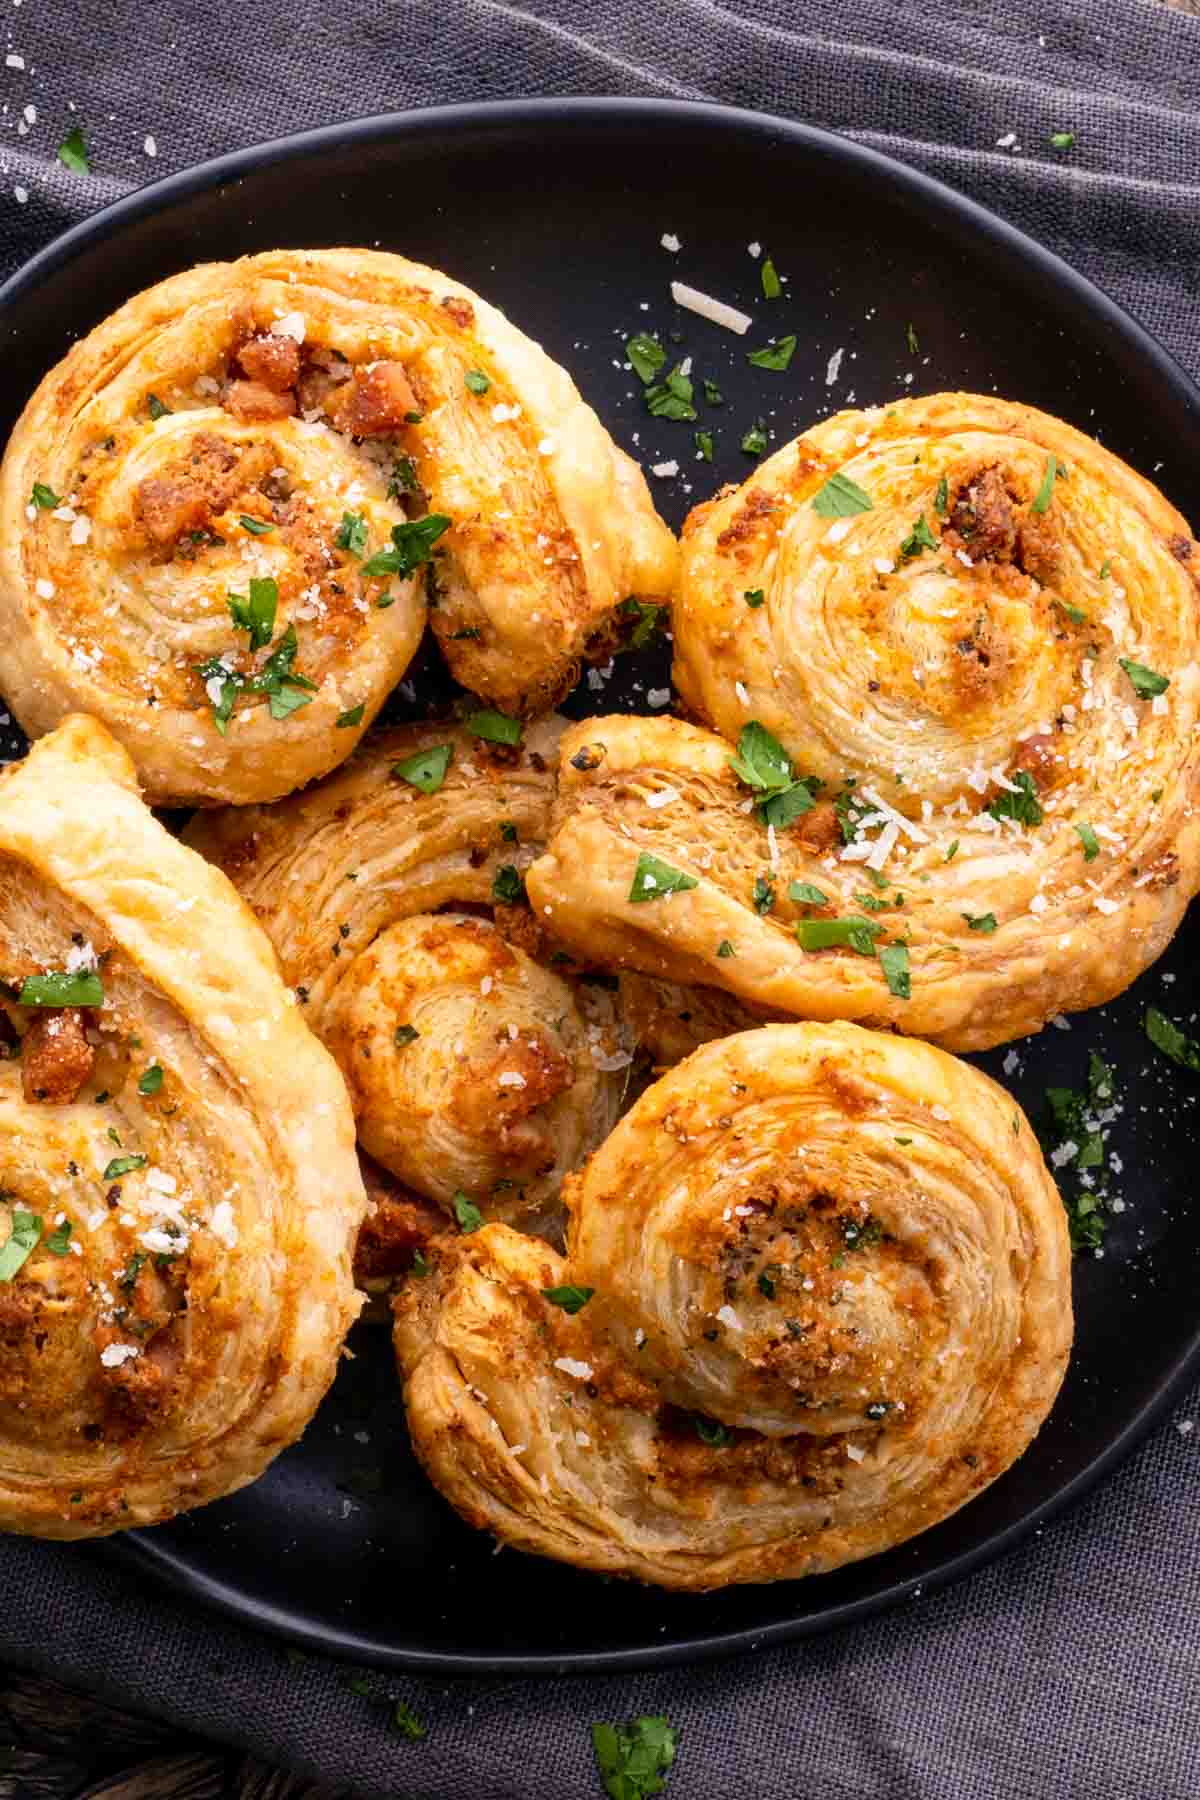 A plate of stuffed pastry with parmesan cheese and parsley.